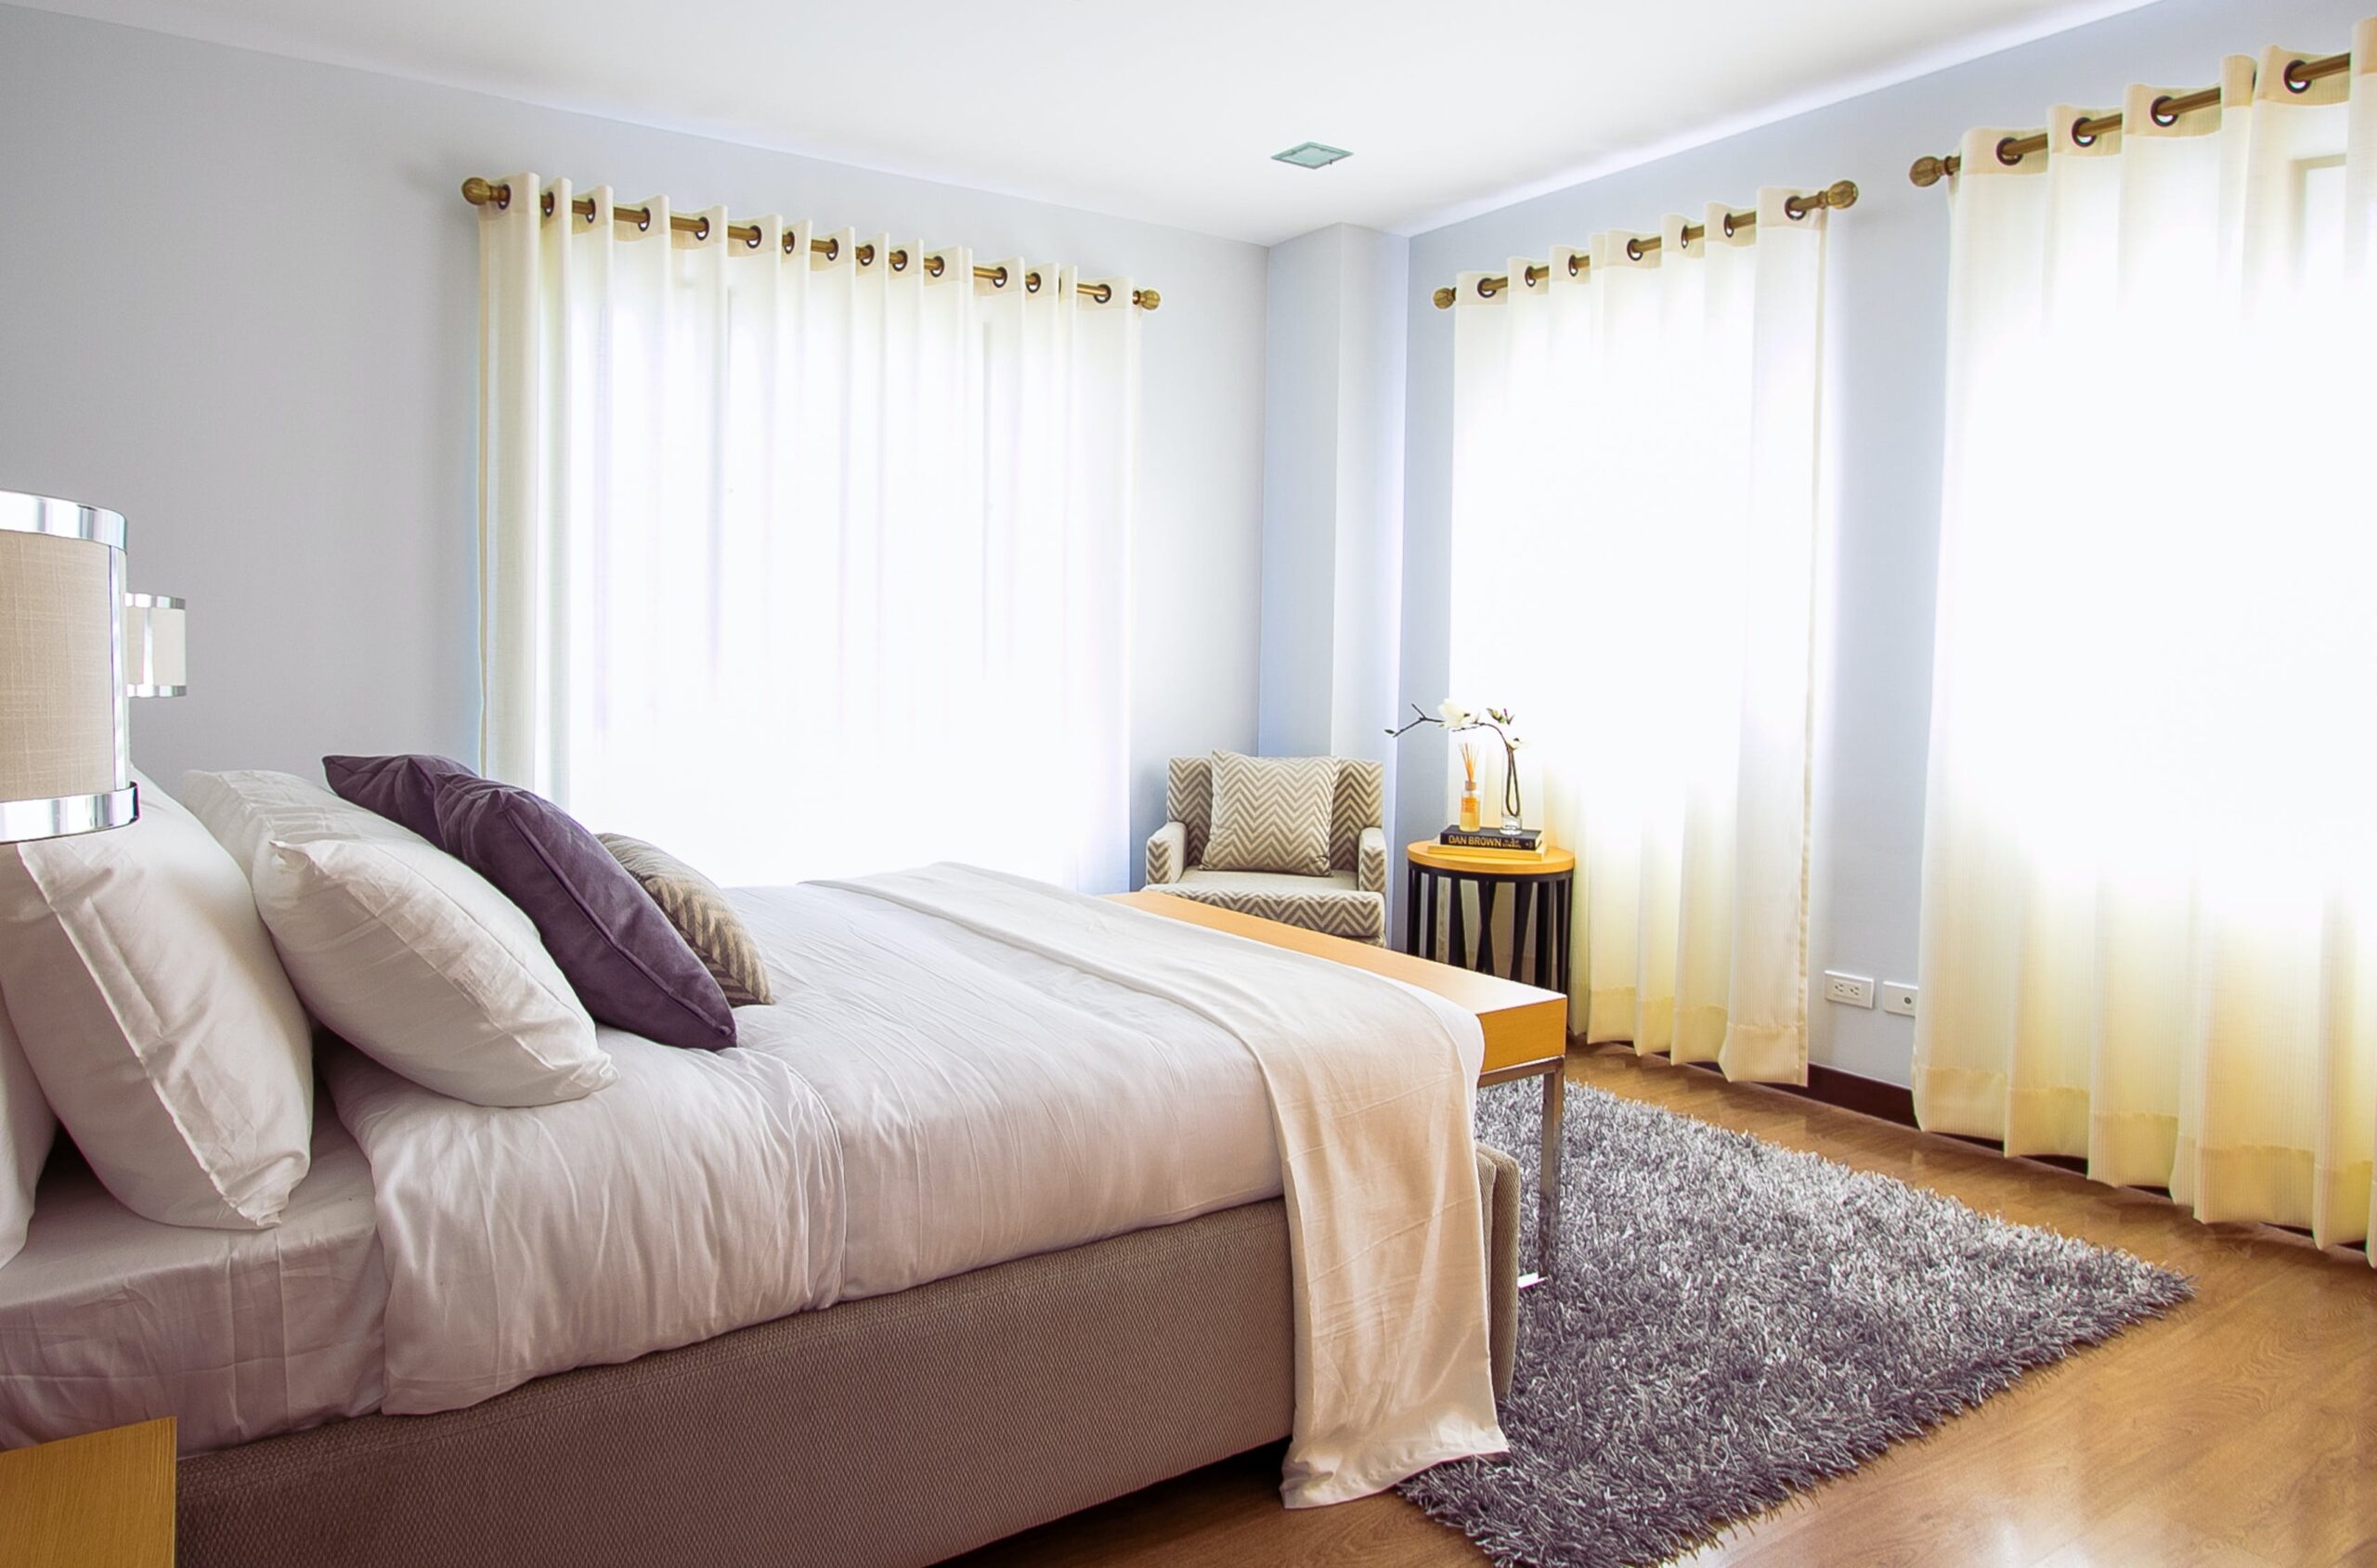 5 Easy-to-Follow Tips to Ensure Healthy Living Conditions in Your Bedroom